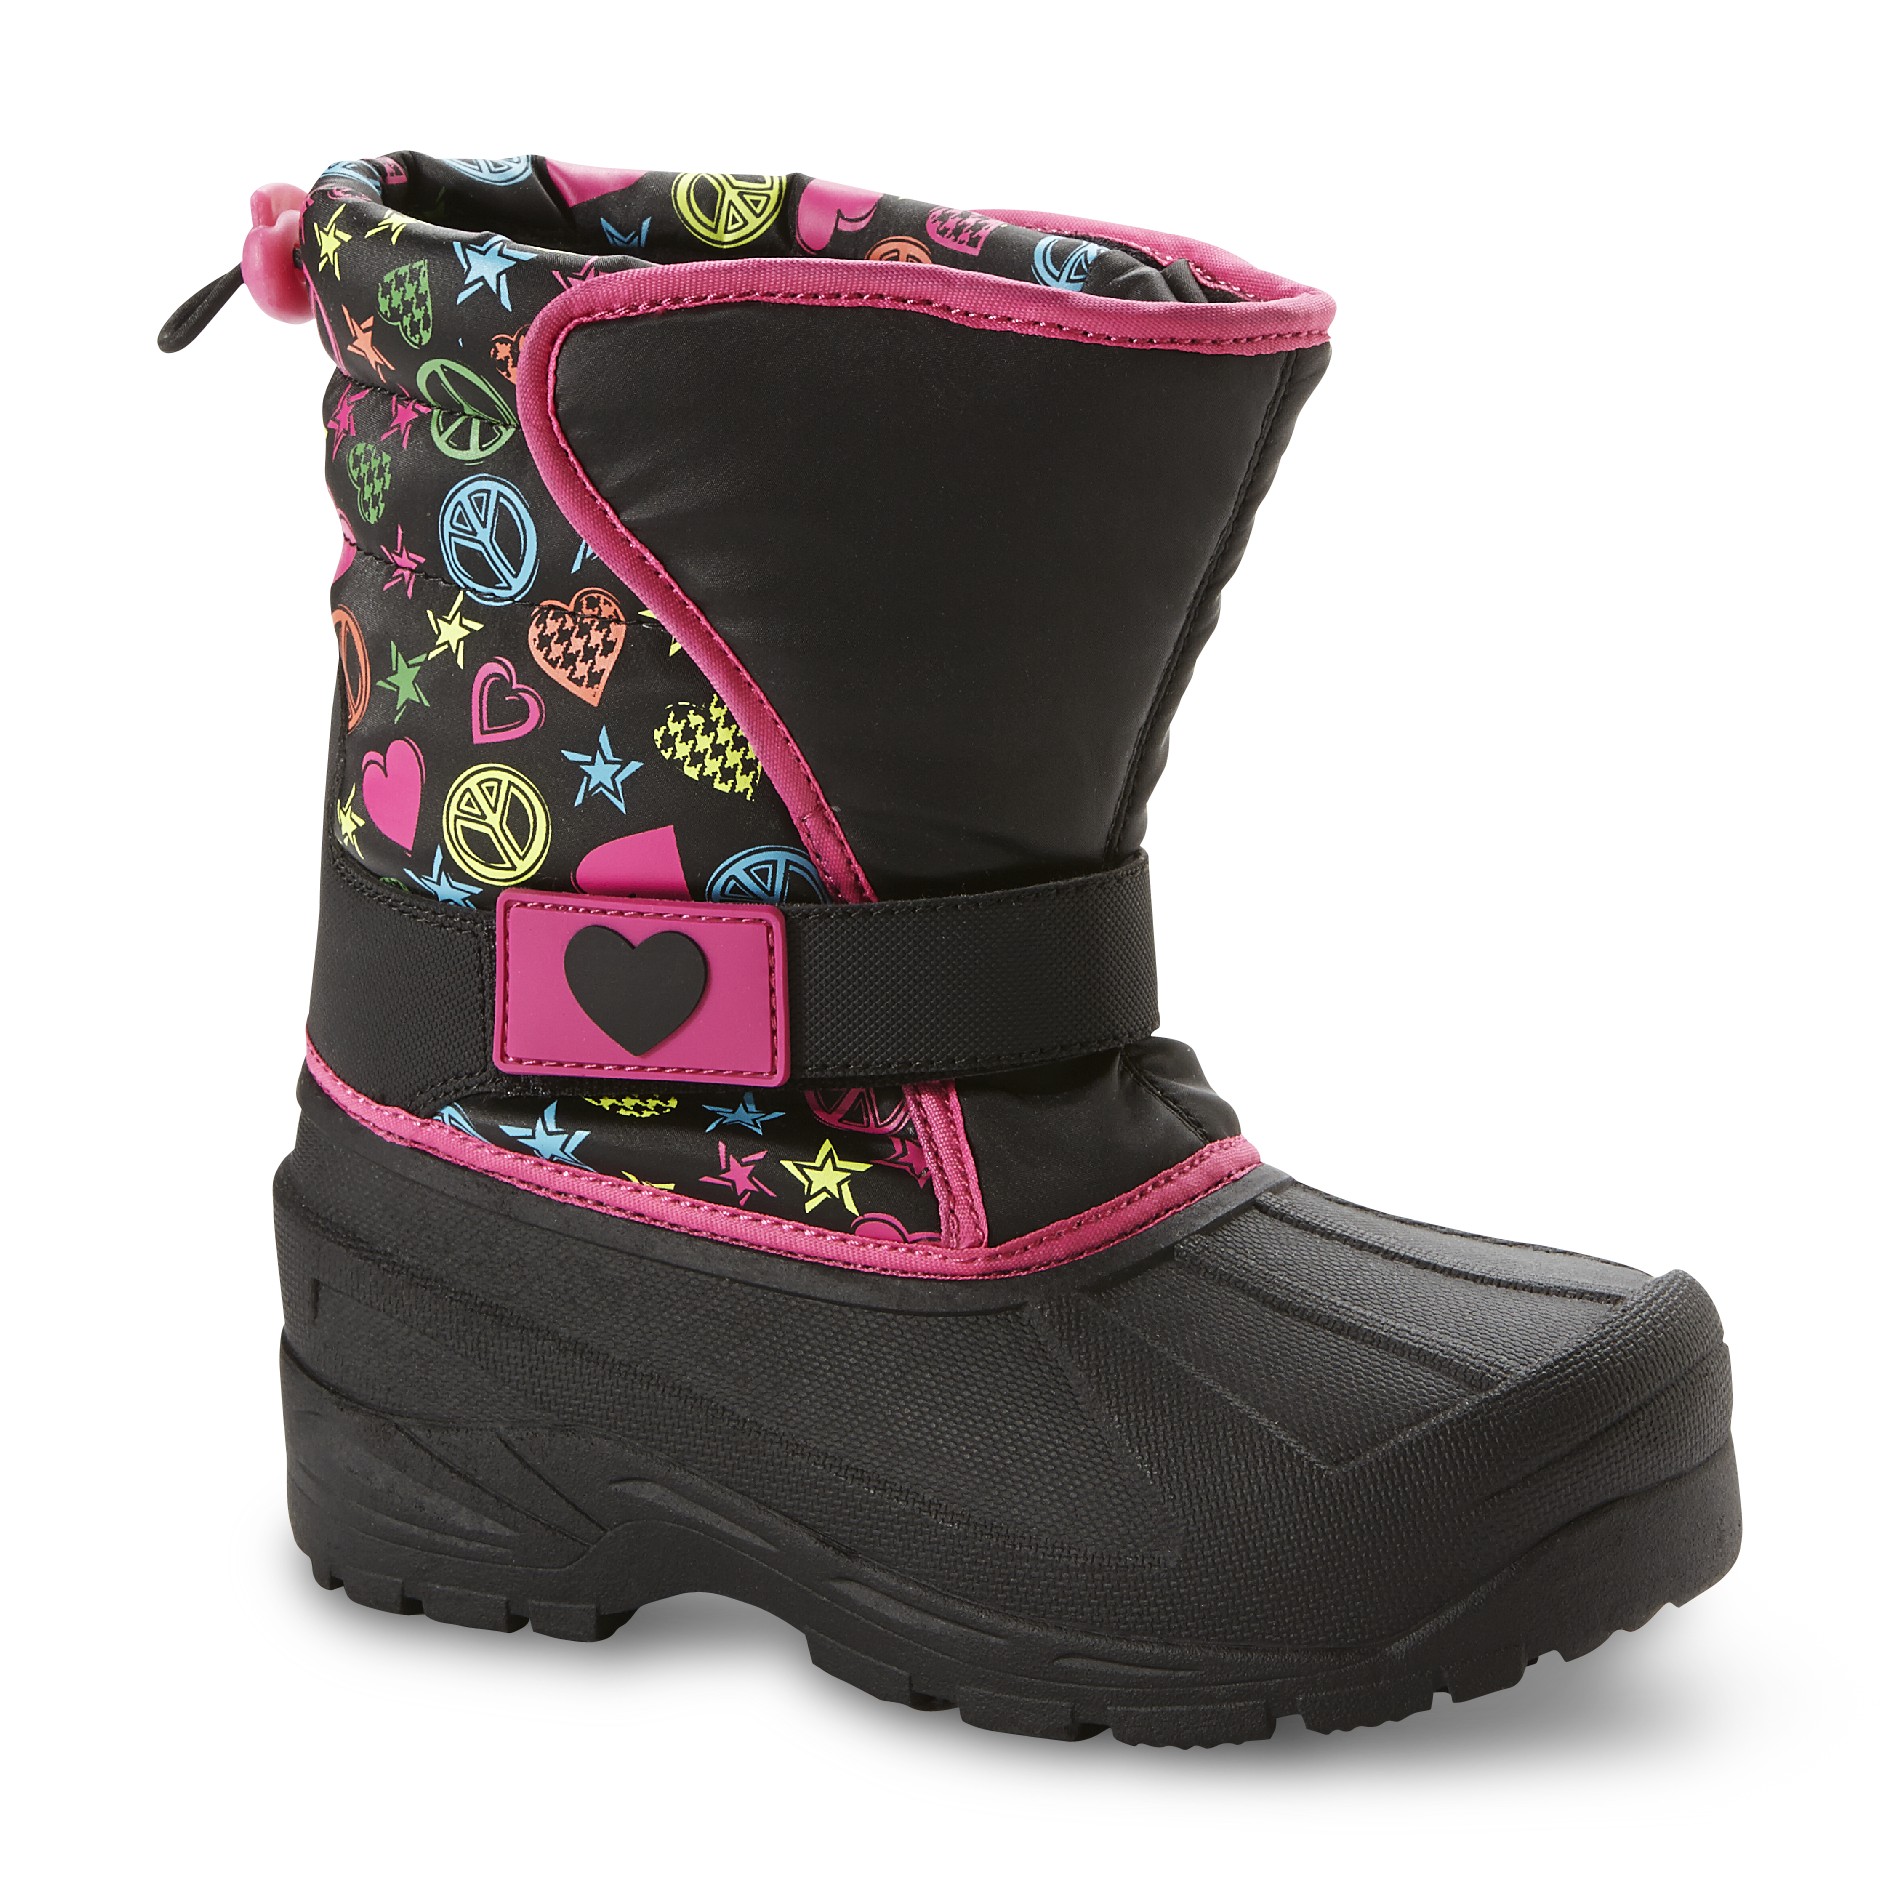 Athletech Girl's Touhy 6" Winter Boot - Pink/Black